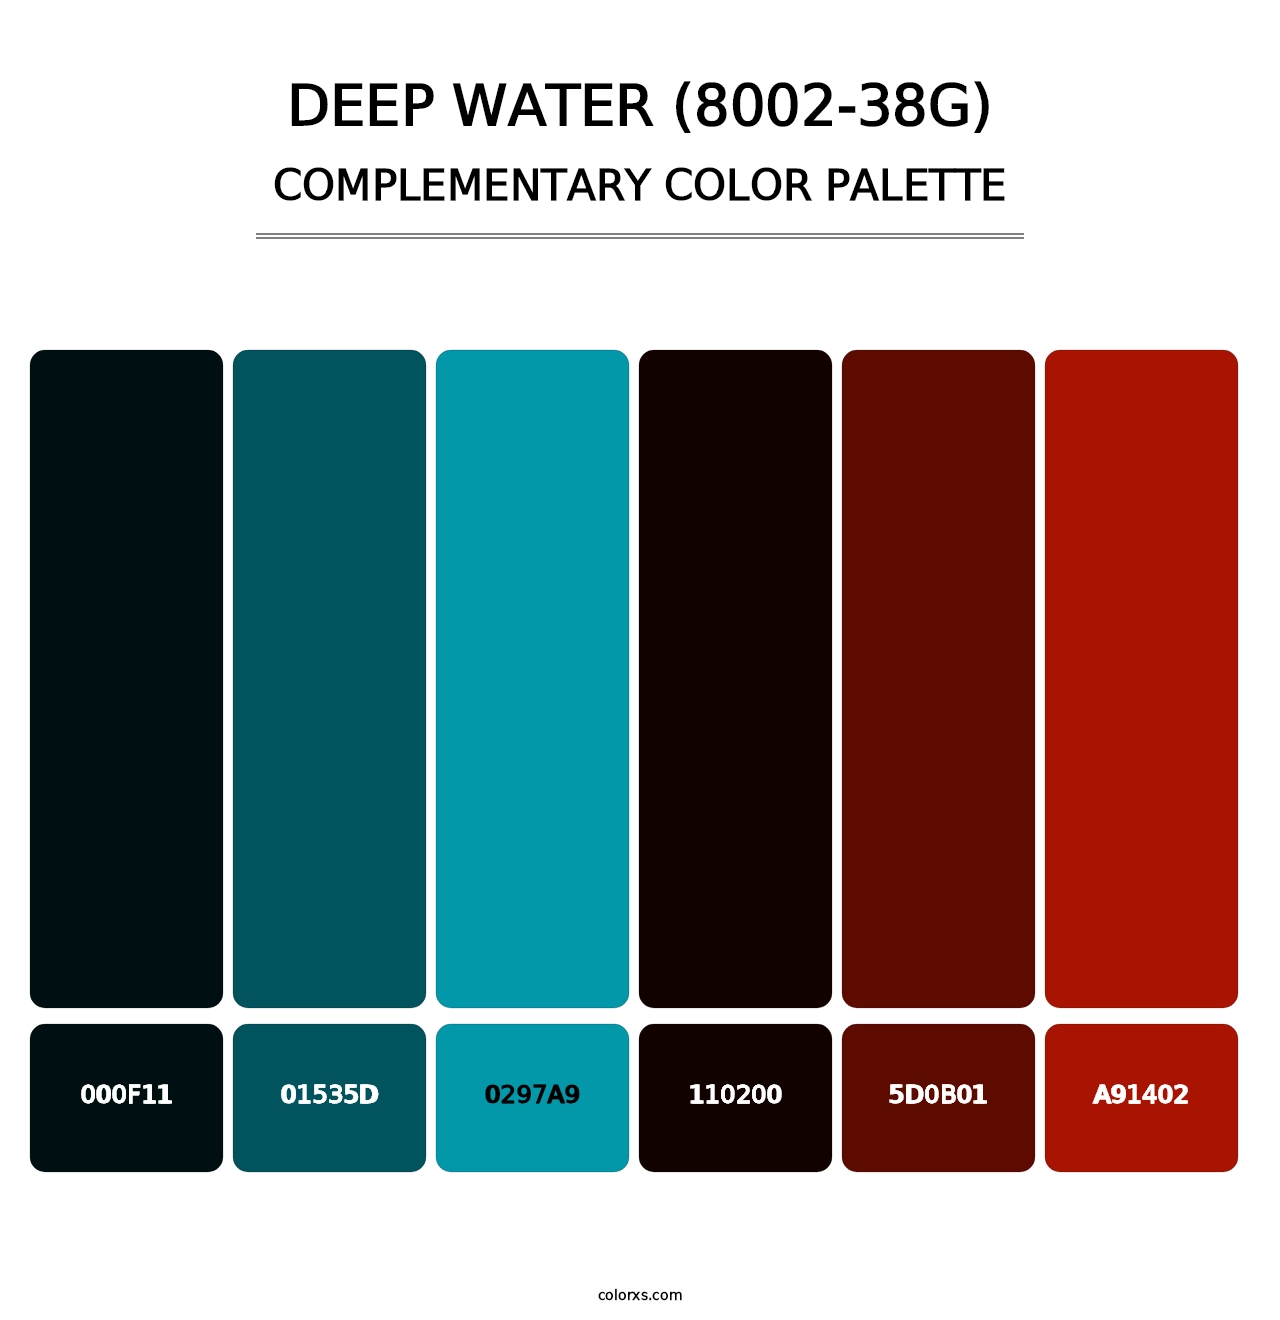 Deep Water (8002-38G) - Complementary Color Palette